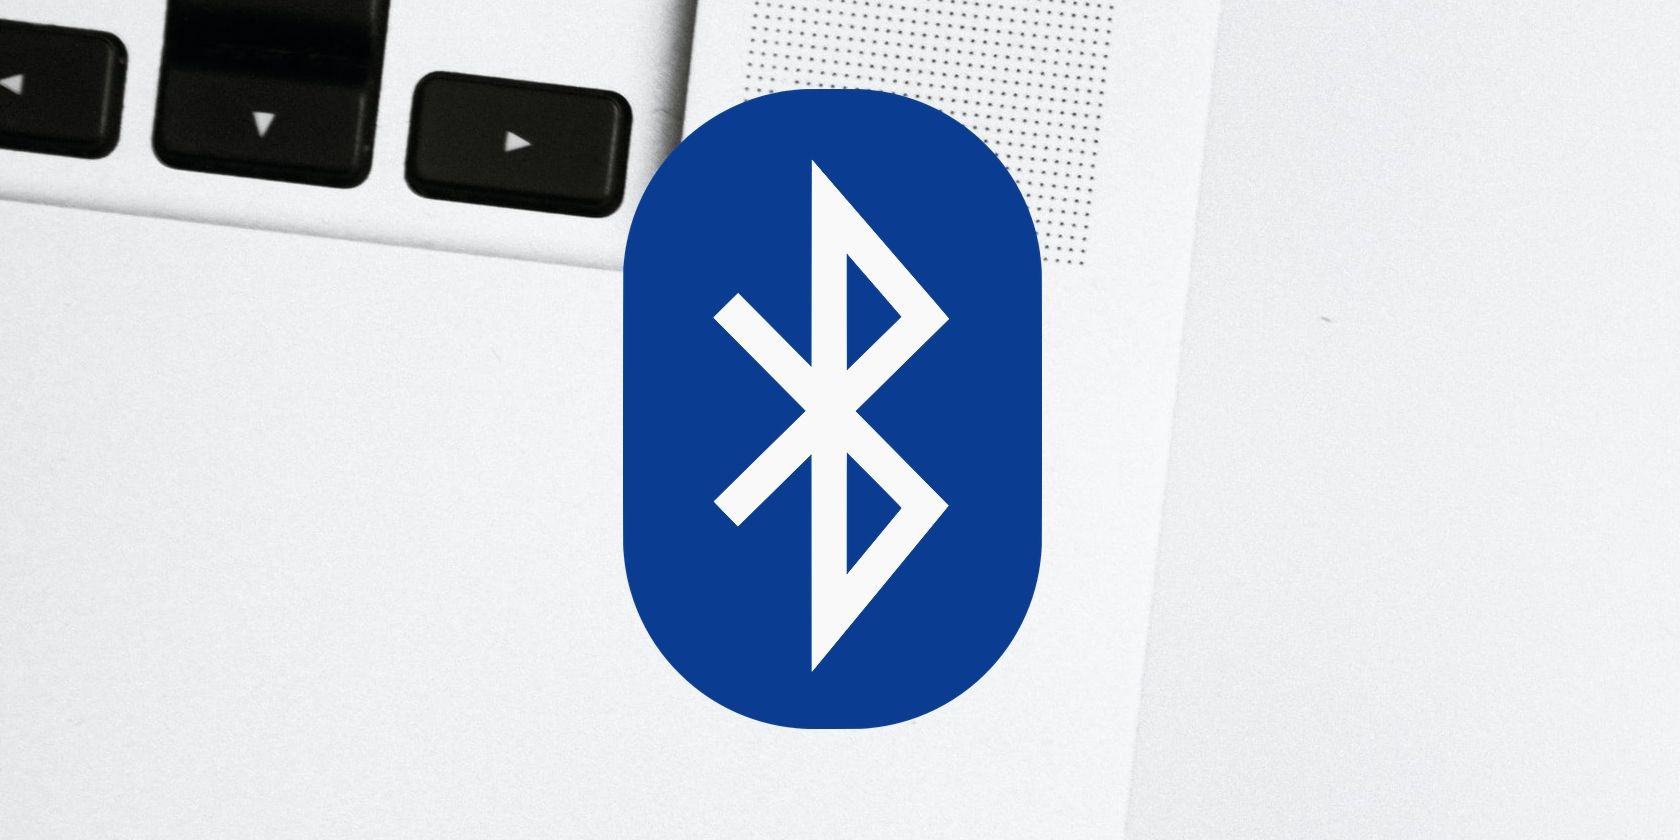 Corner of Macbook base with Bluetooth logo in the image centre.